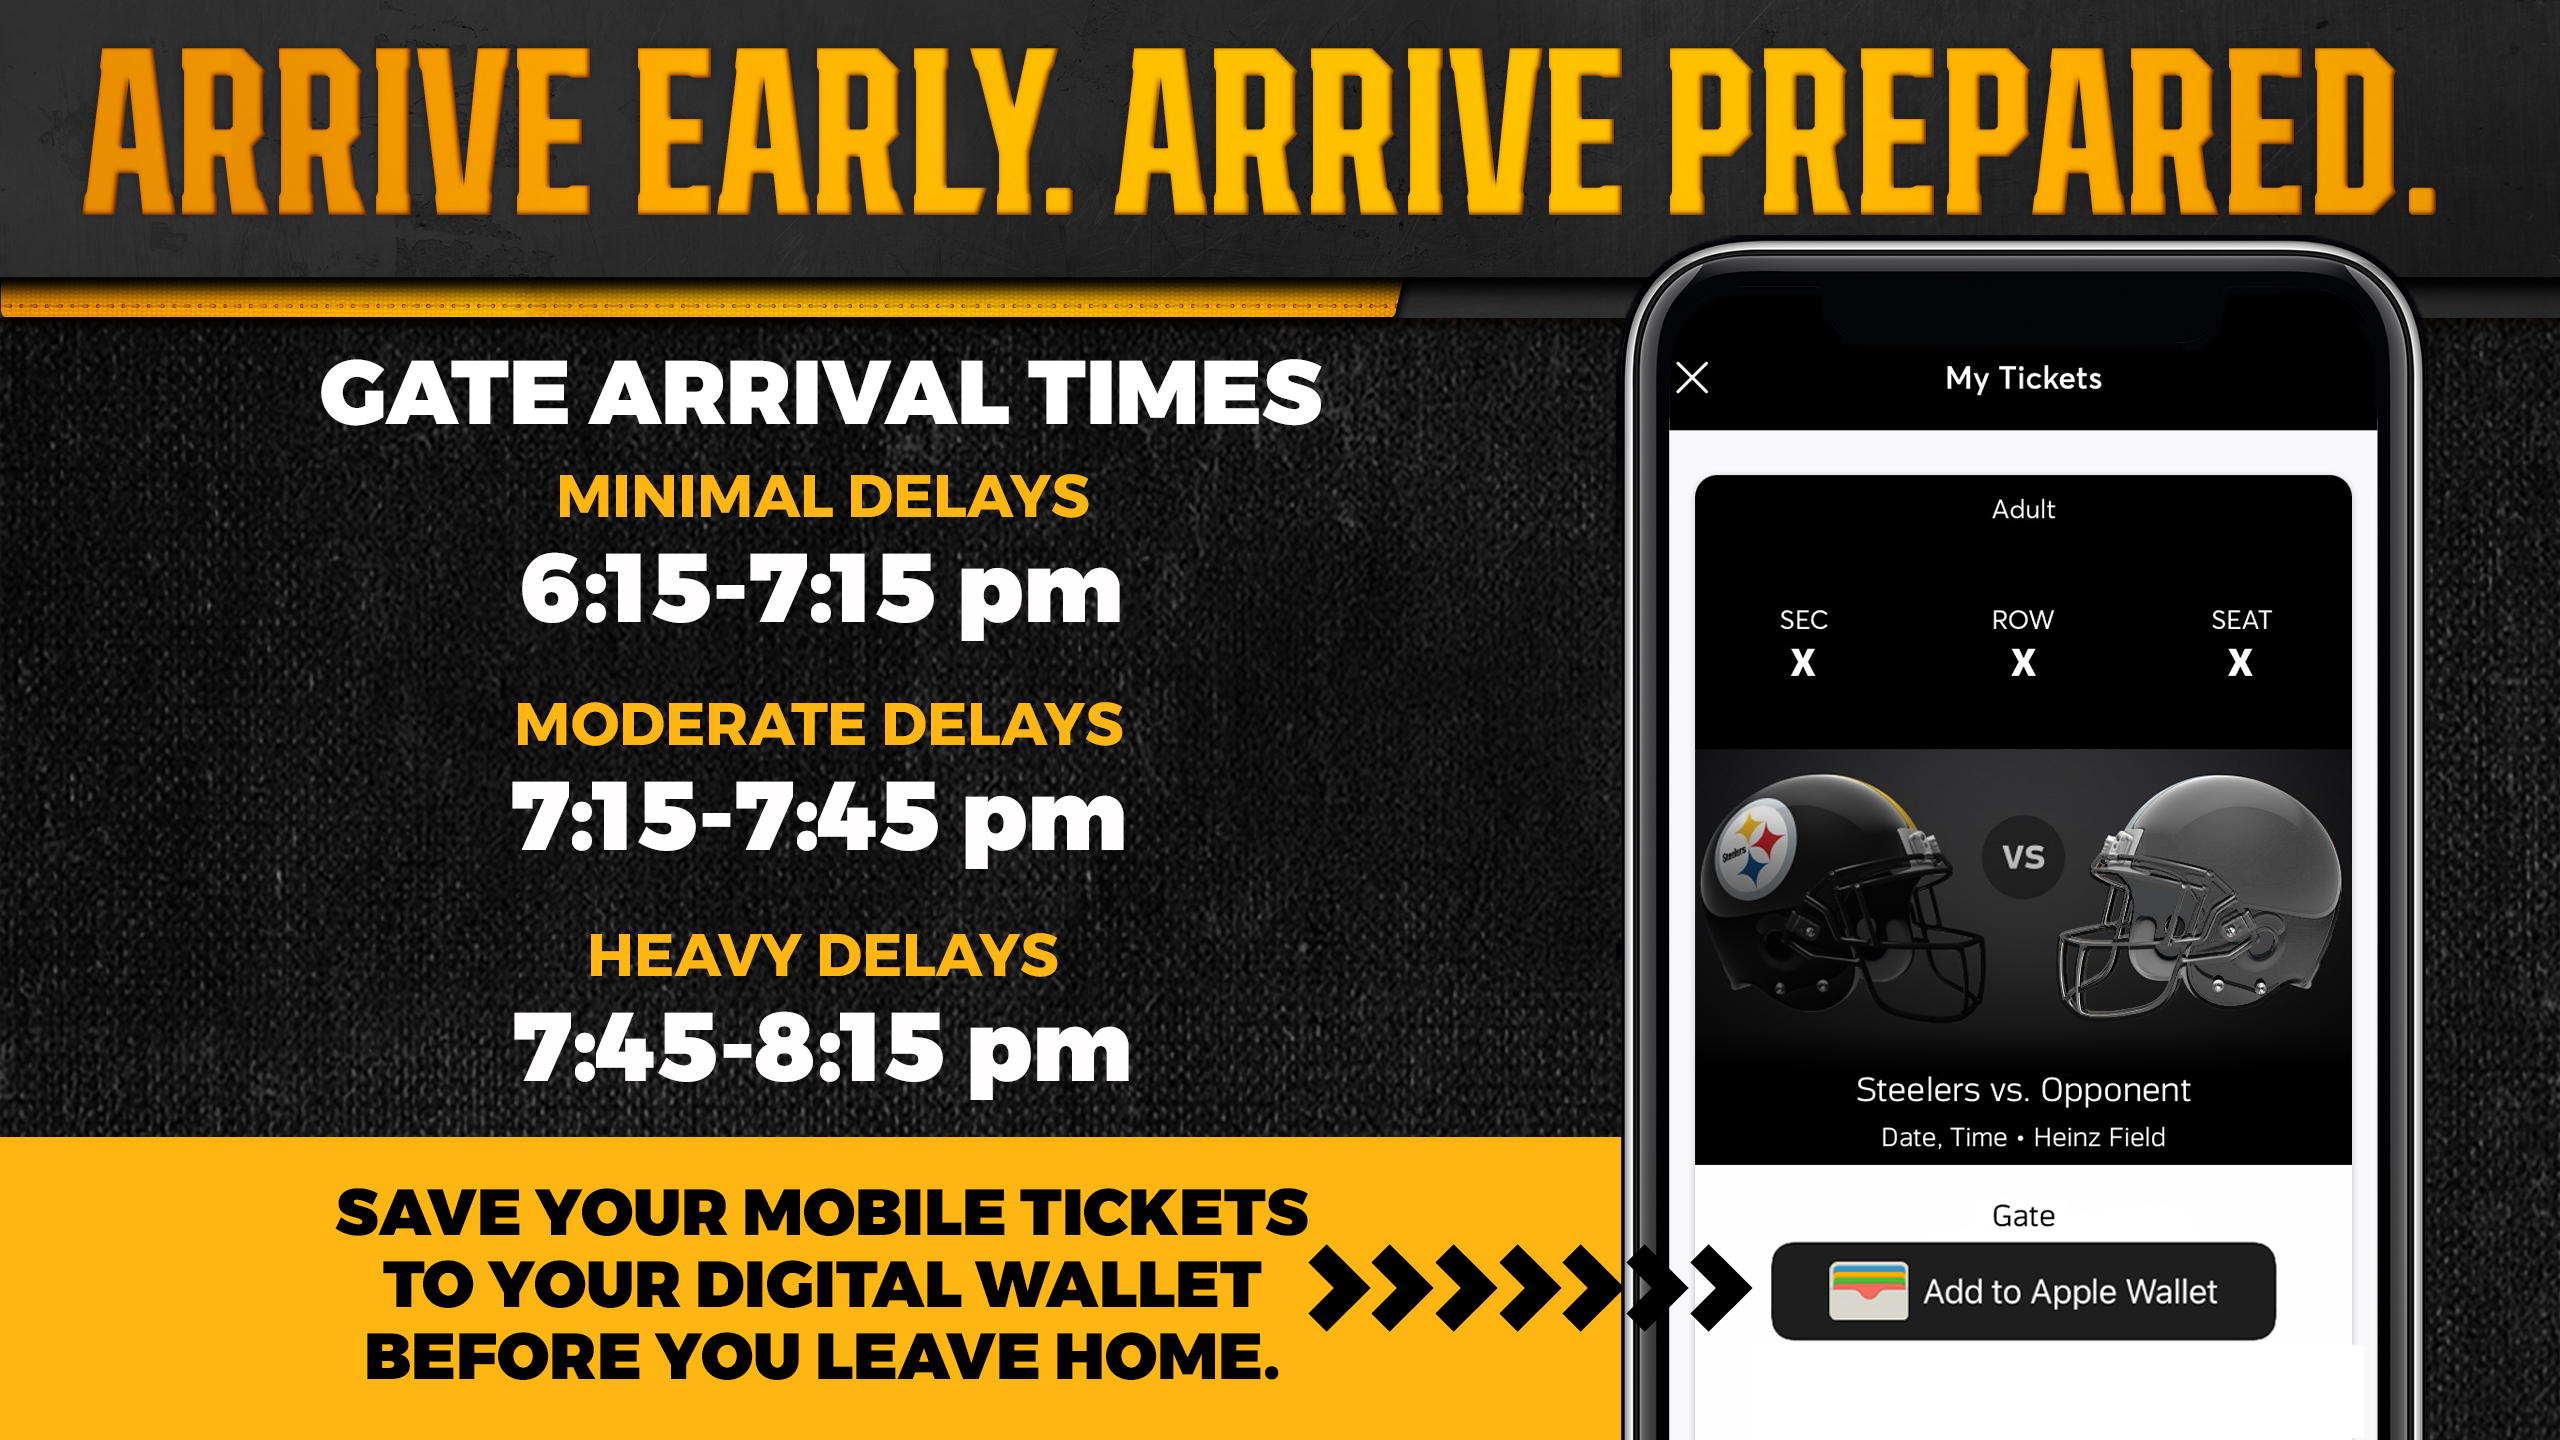 Approximate Gate Arrival Times for 8:15 p.m. Steelers Football Game